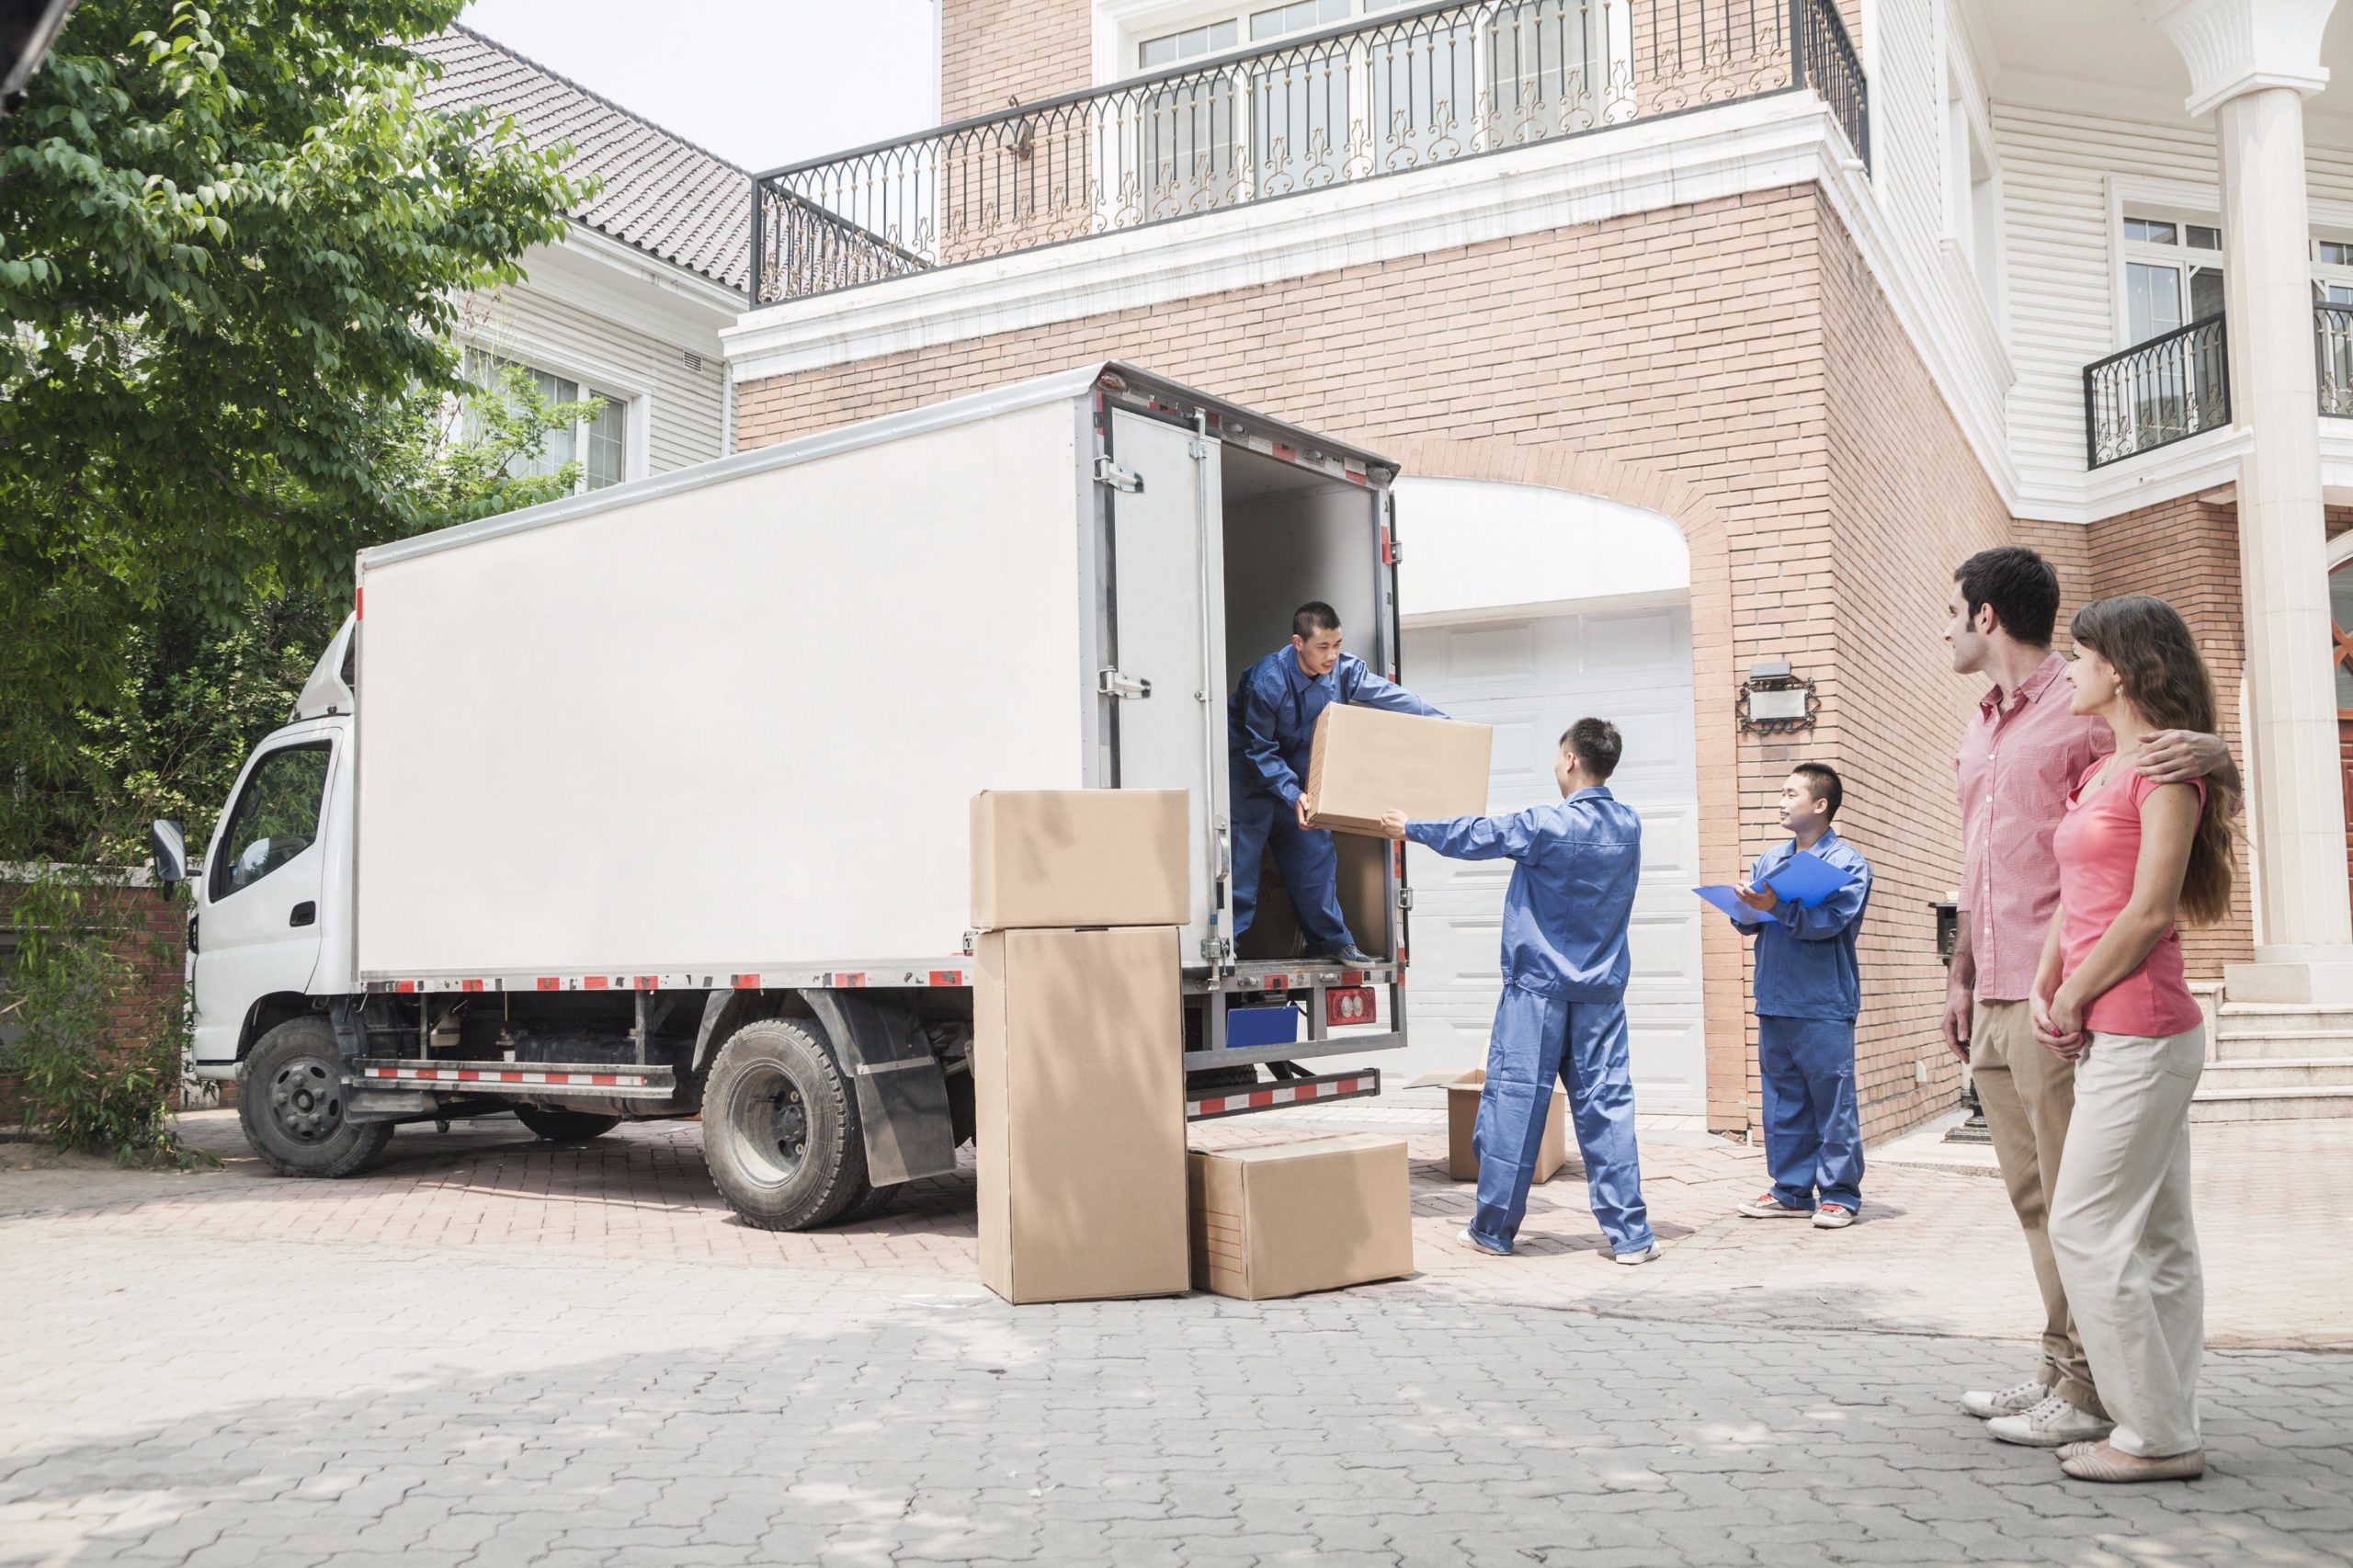 How to Find a Responsible Removals Company